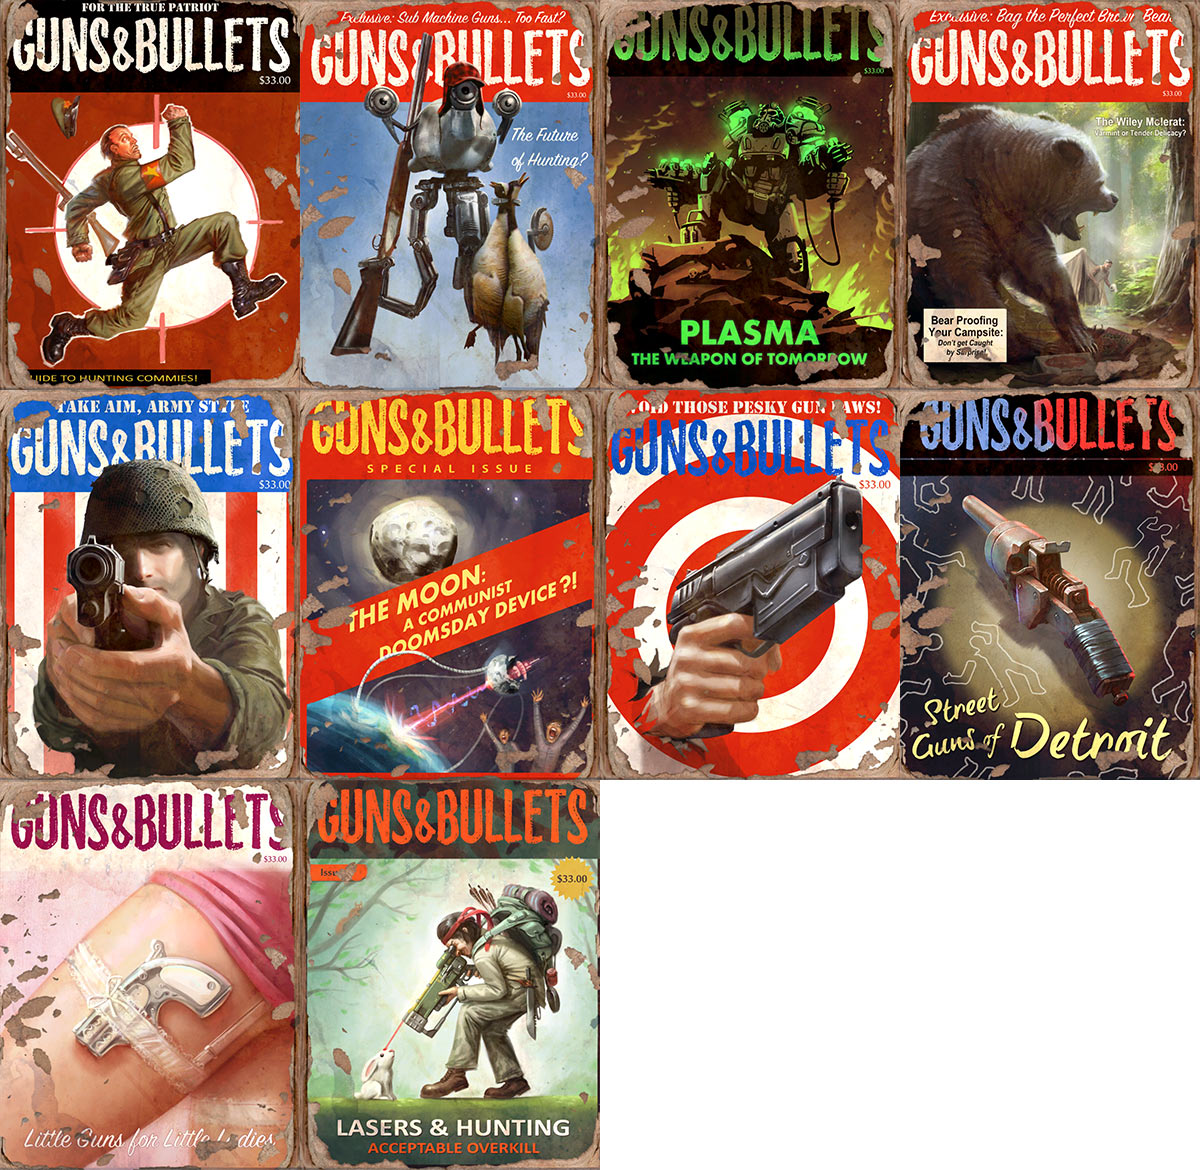 Fallout 76 - Guns and Bullets Magazines in Fallout 76